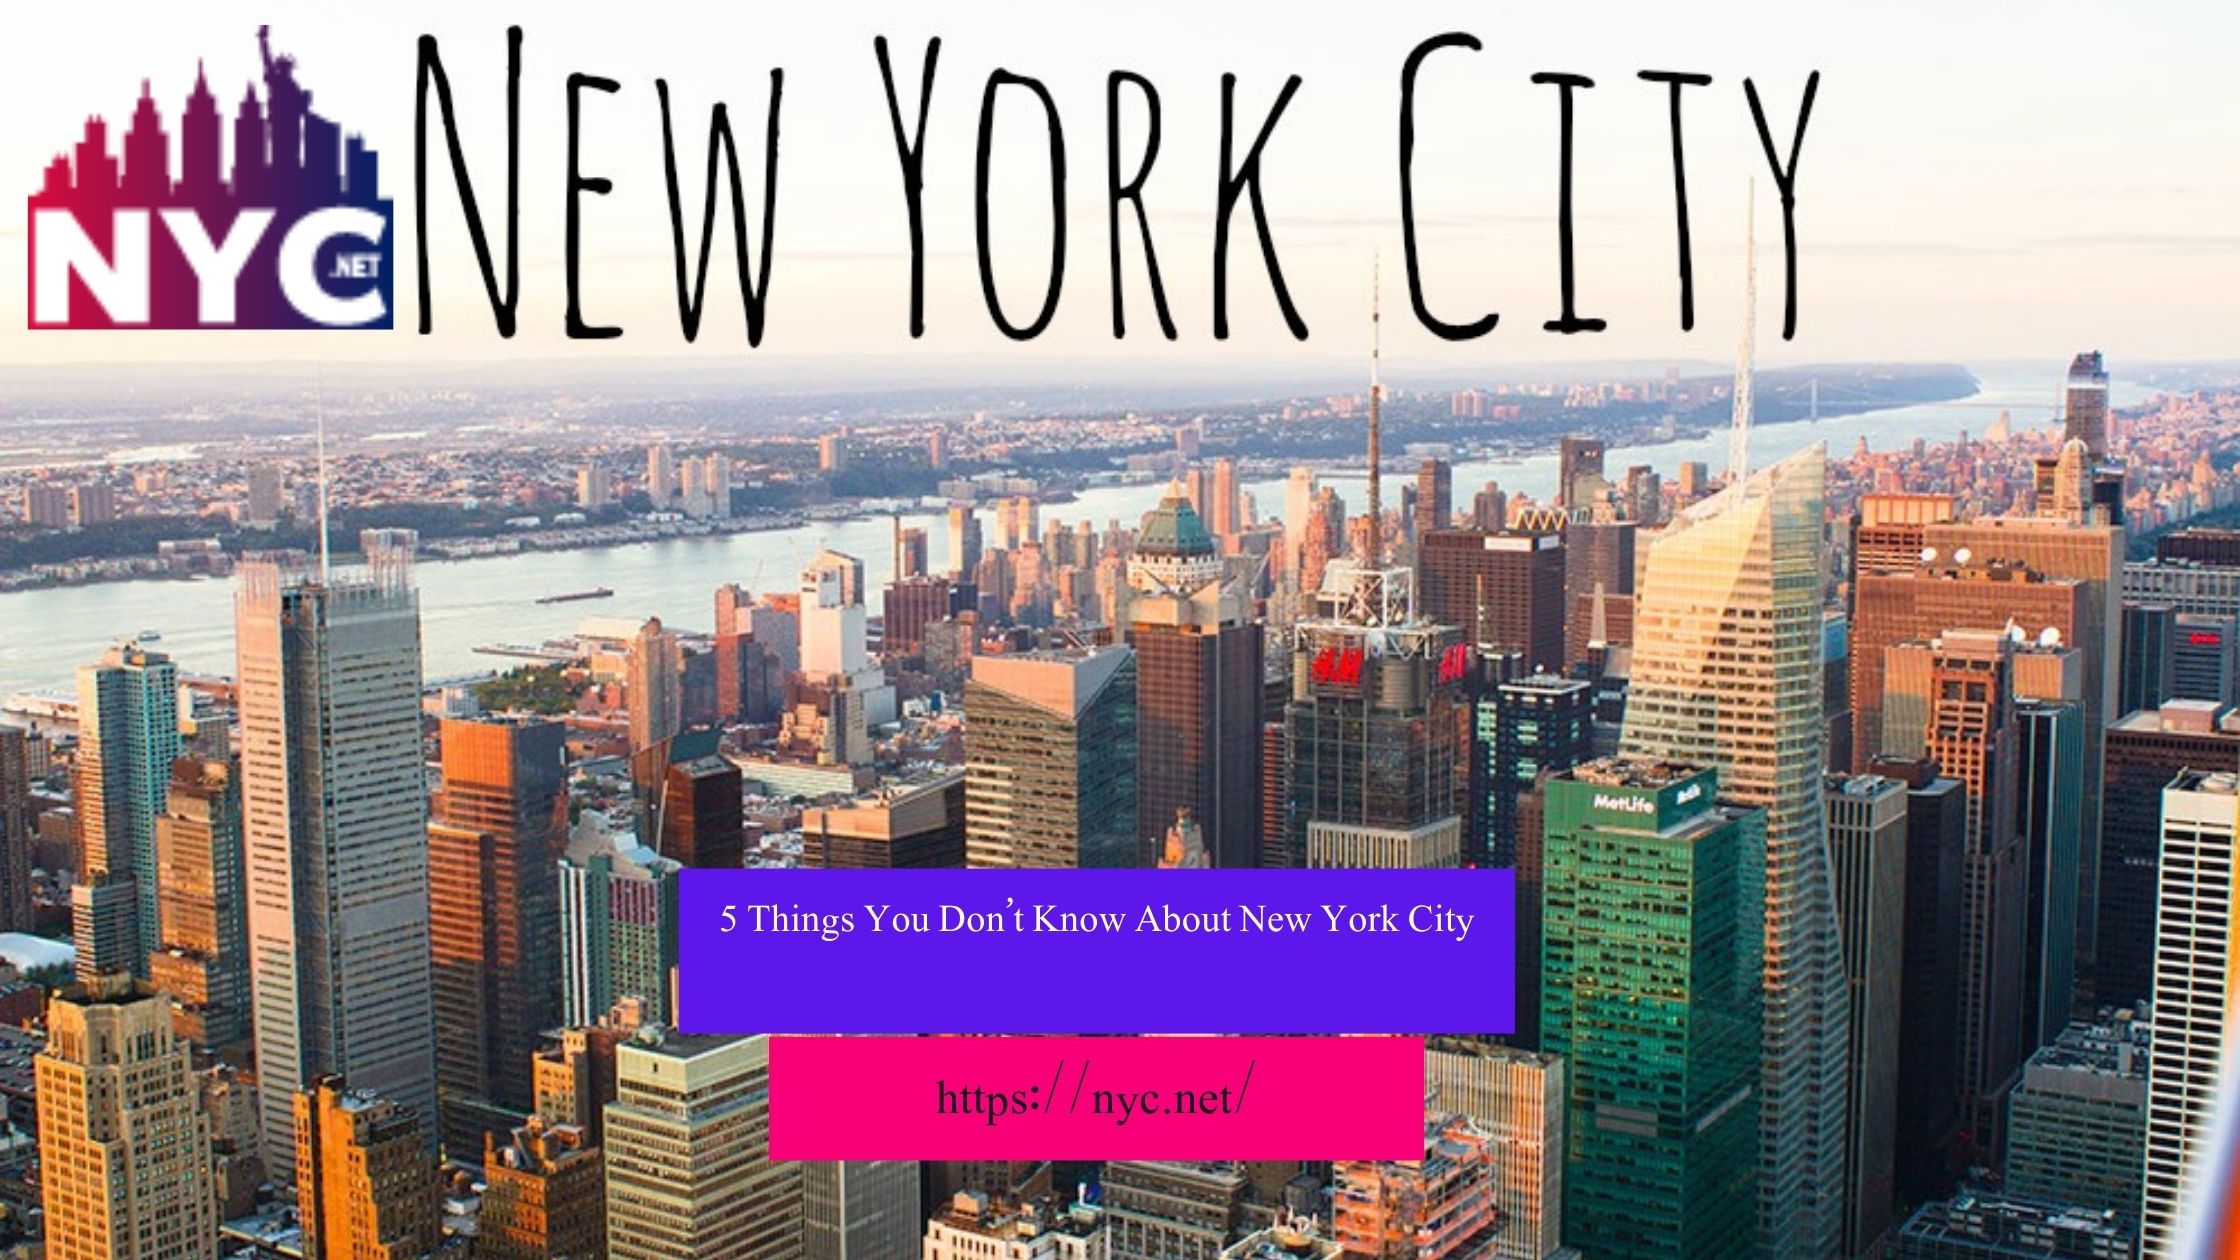 5 Things You Don’t Know About New York City